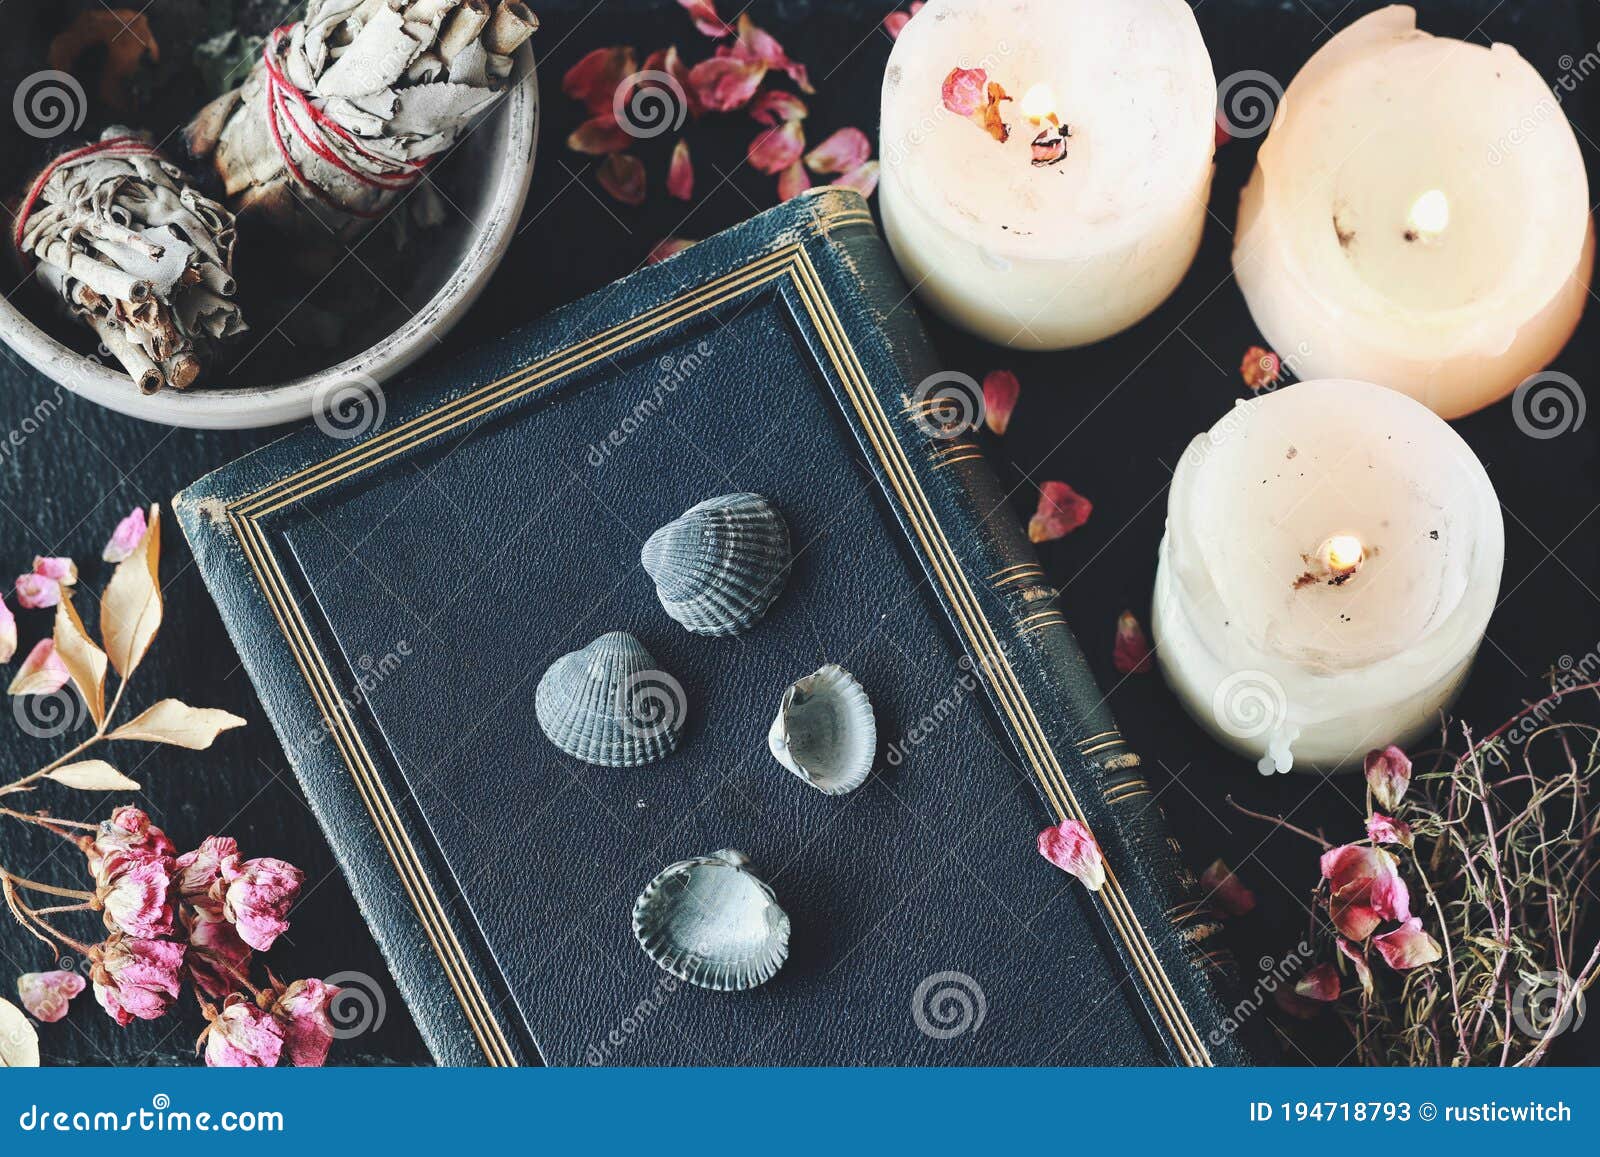 Divination Using Sea Shells in Hoodoo Witchcraft Practice on Wiccan Witch  Altar Stock Image - Image of future, evergreen: 194718793